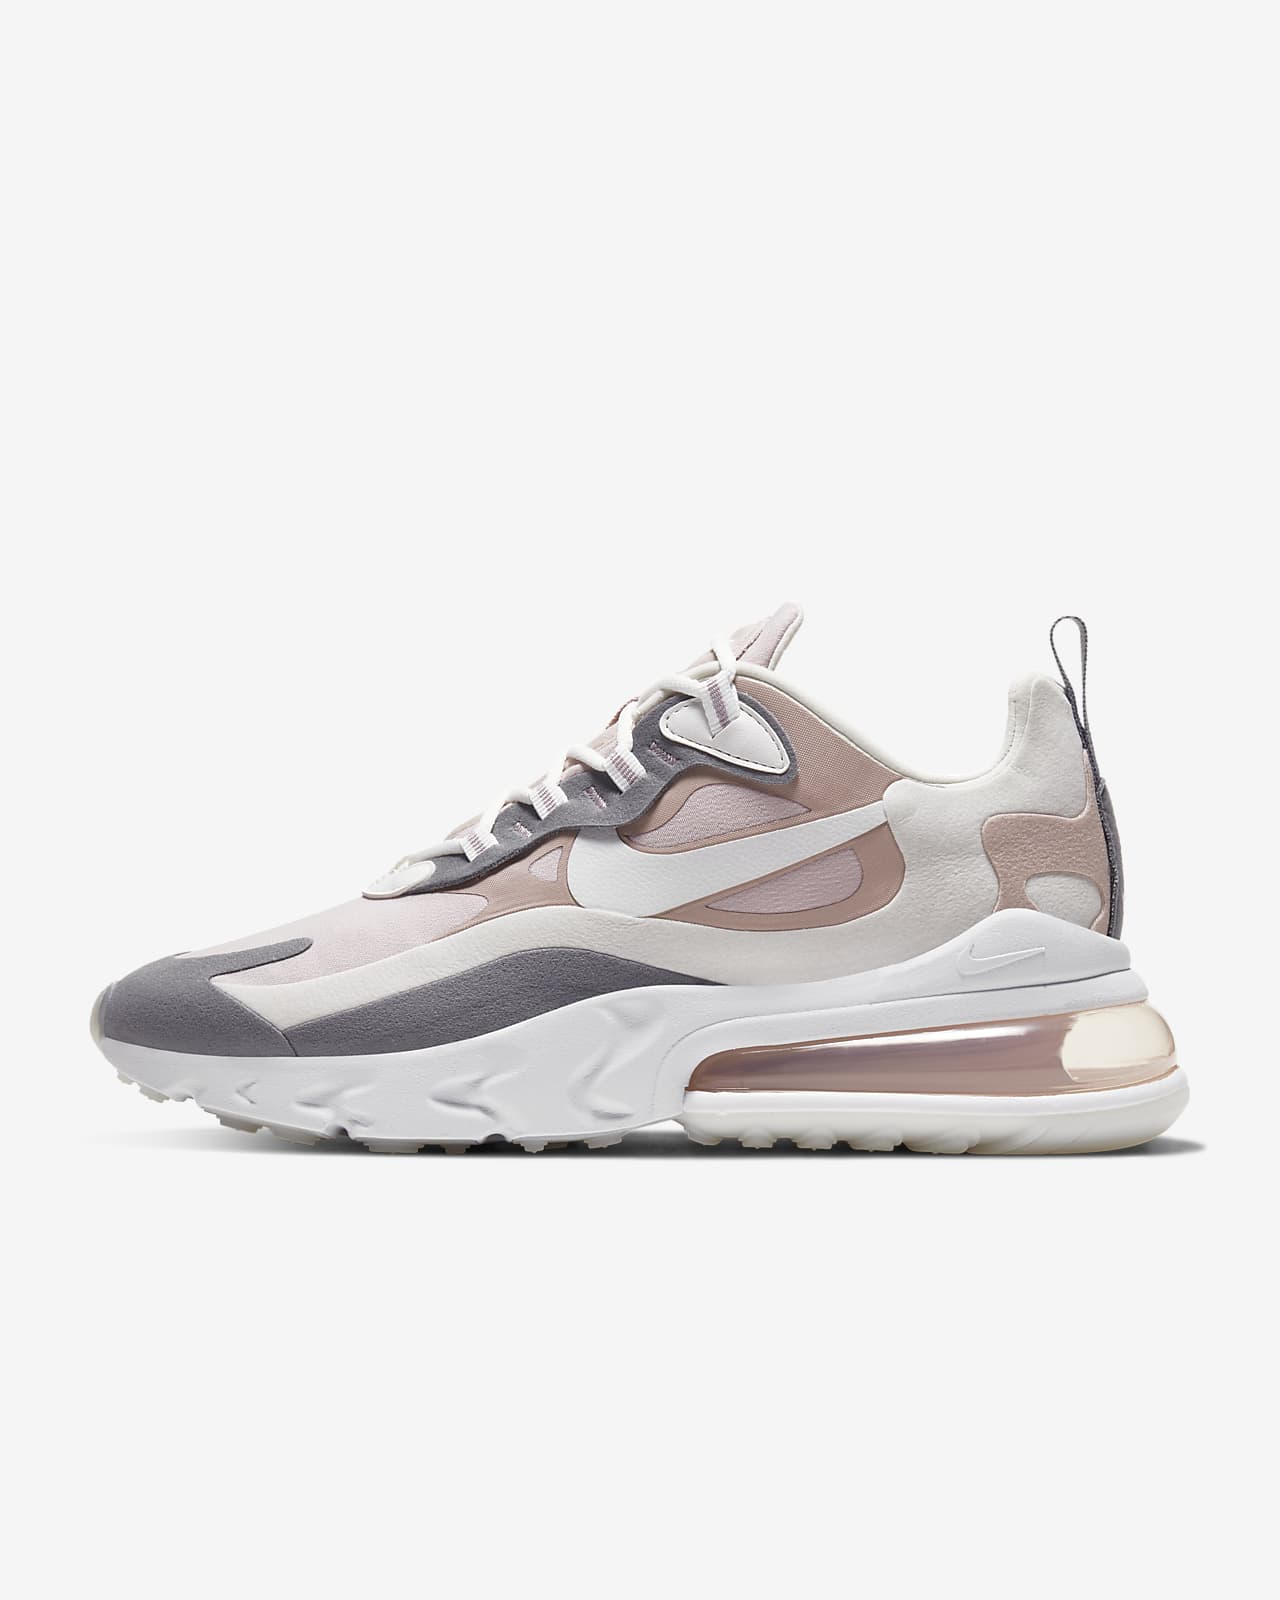 white and gray air max 270